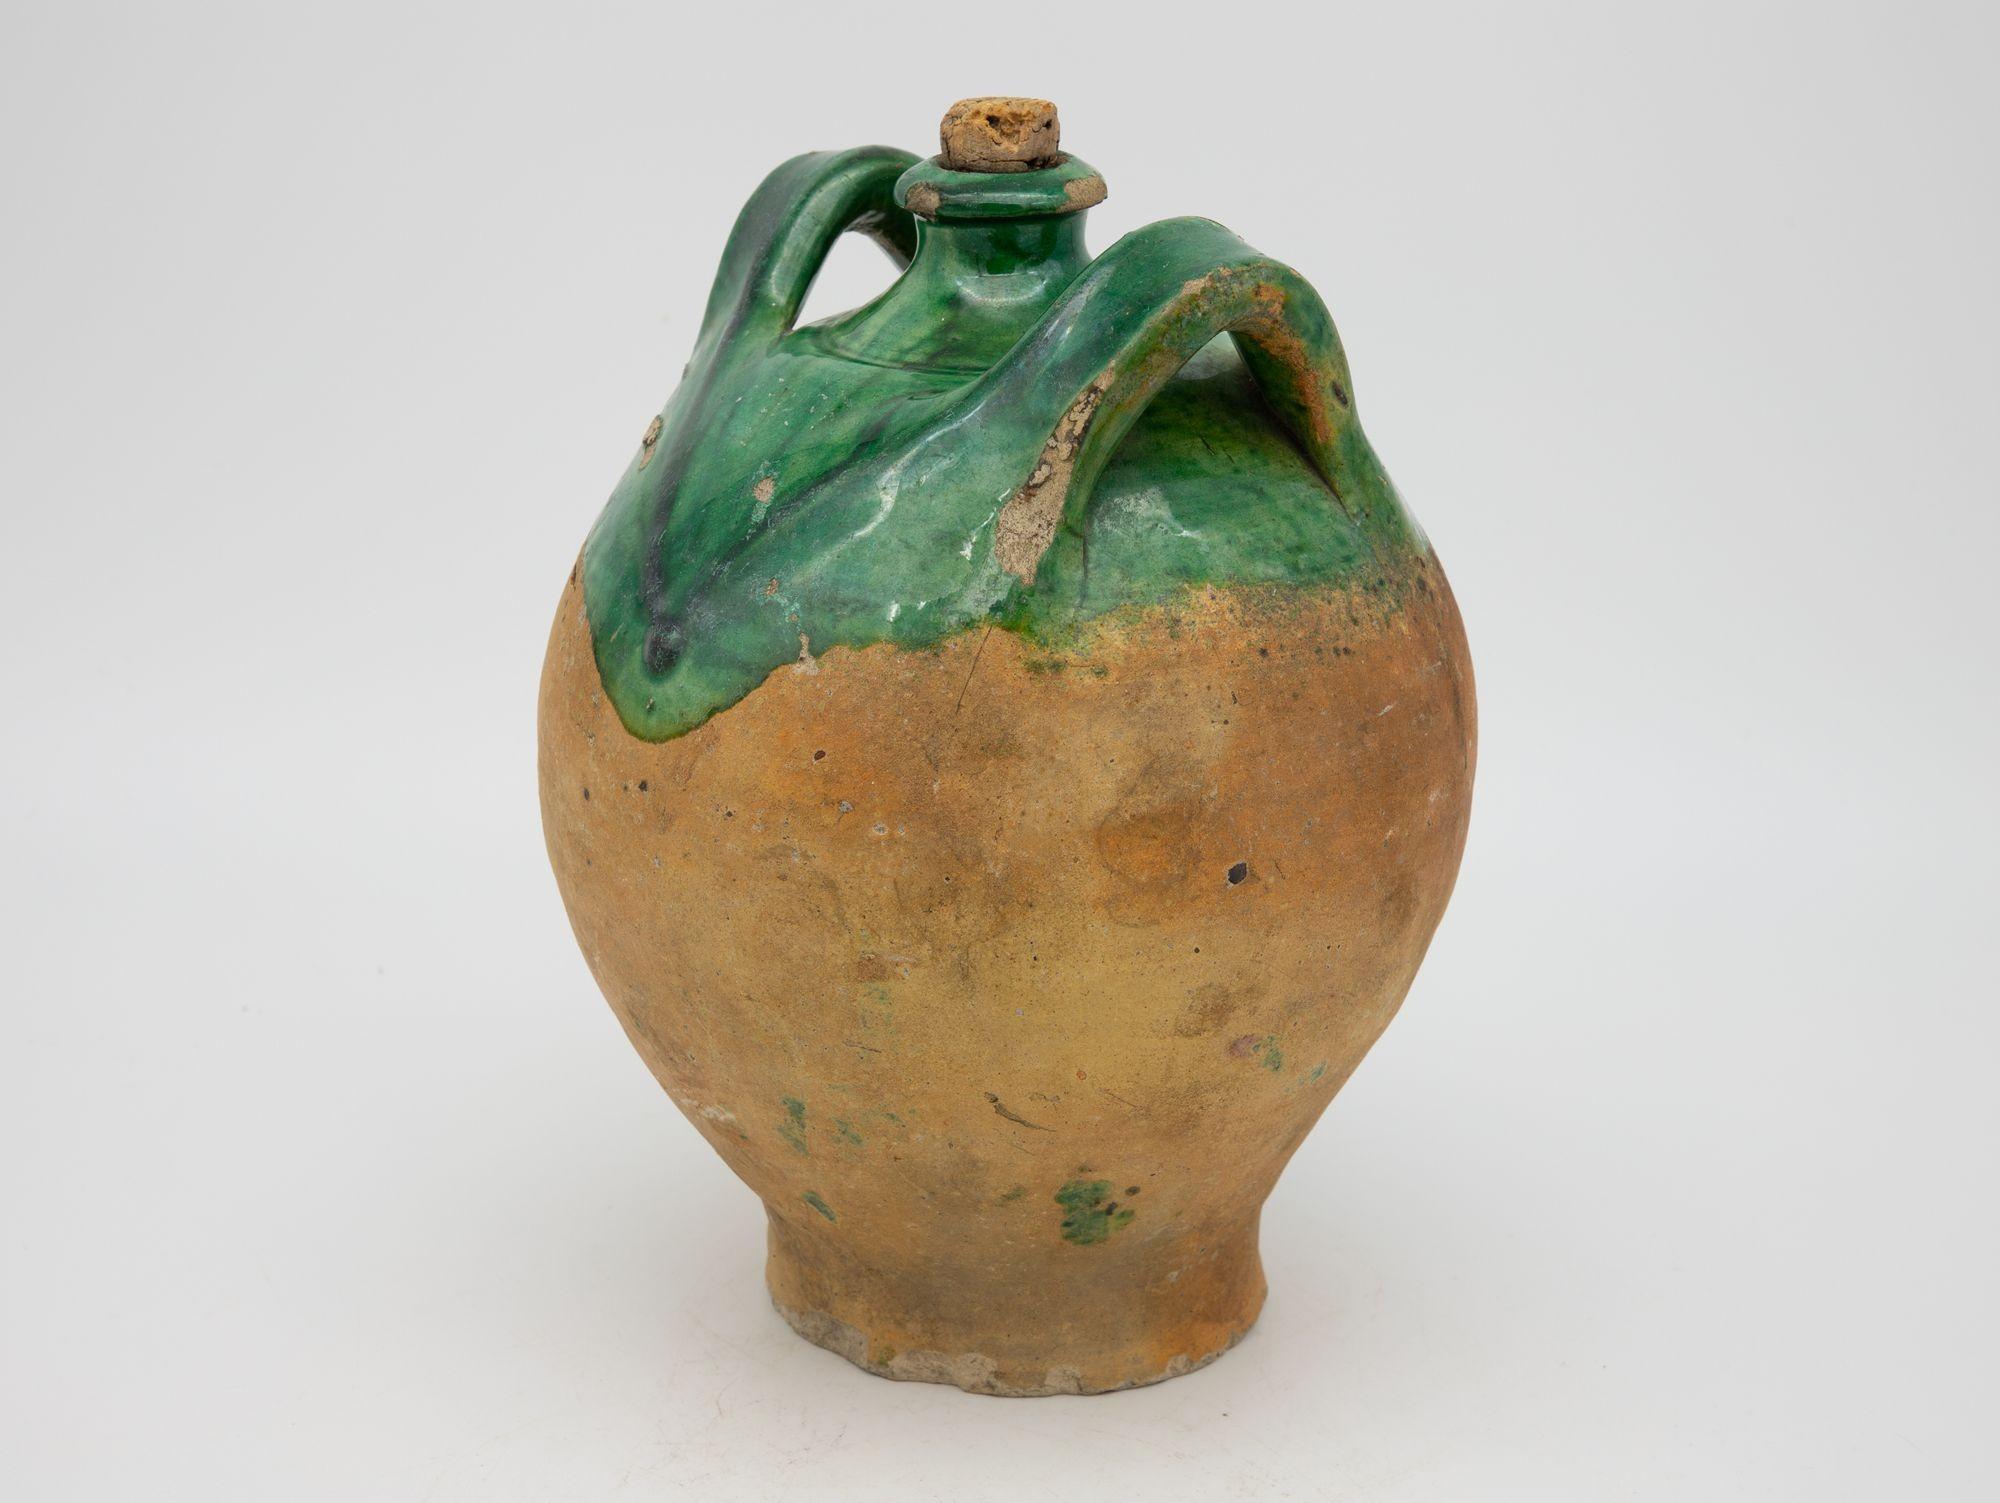 A late 19th century terracotta confit pot from Southwest France. The pot has its original cork and shows two handles with a traditional green glaze. Wear consistent for age and use.